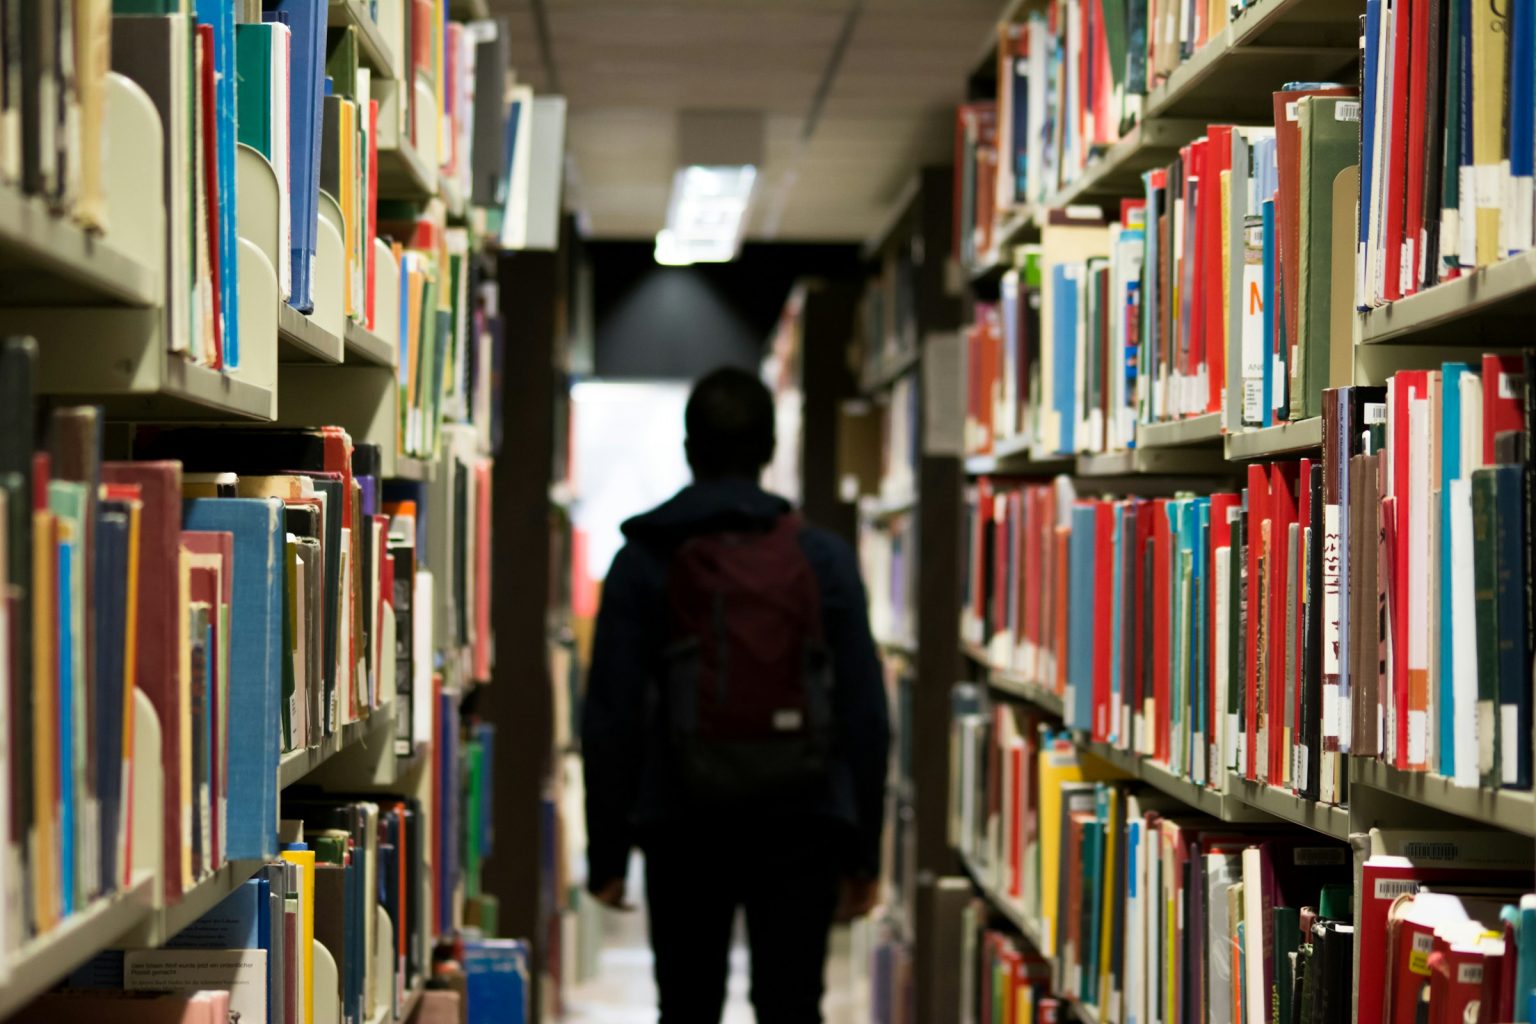 A student walking down a school library